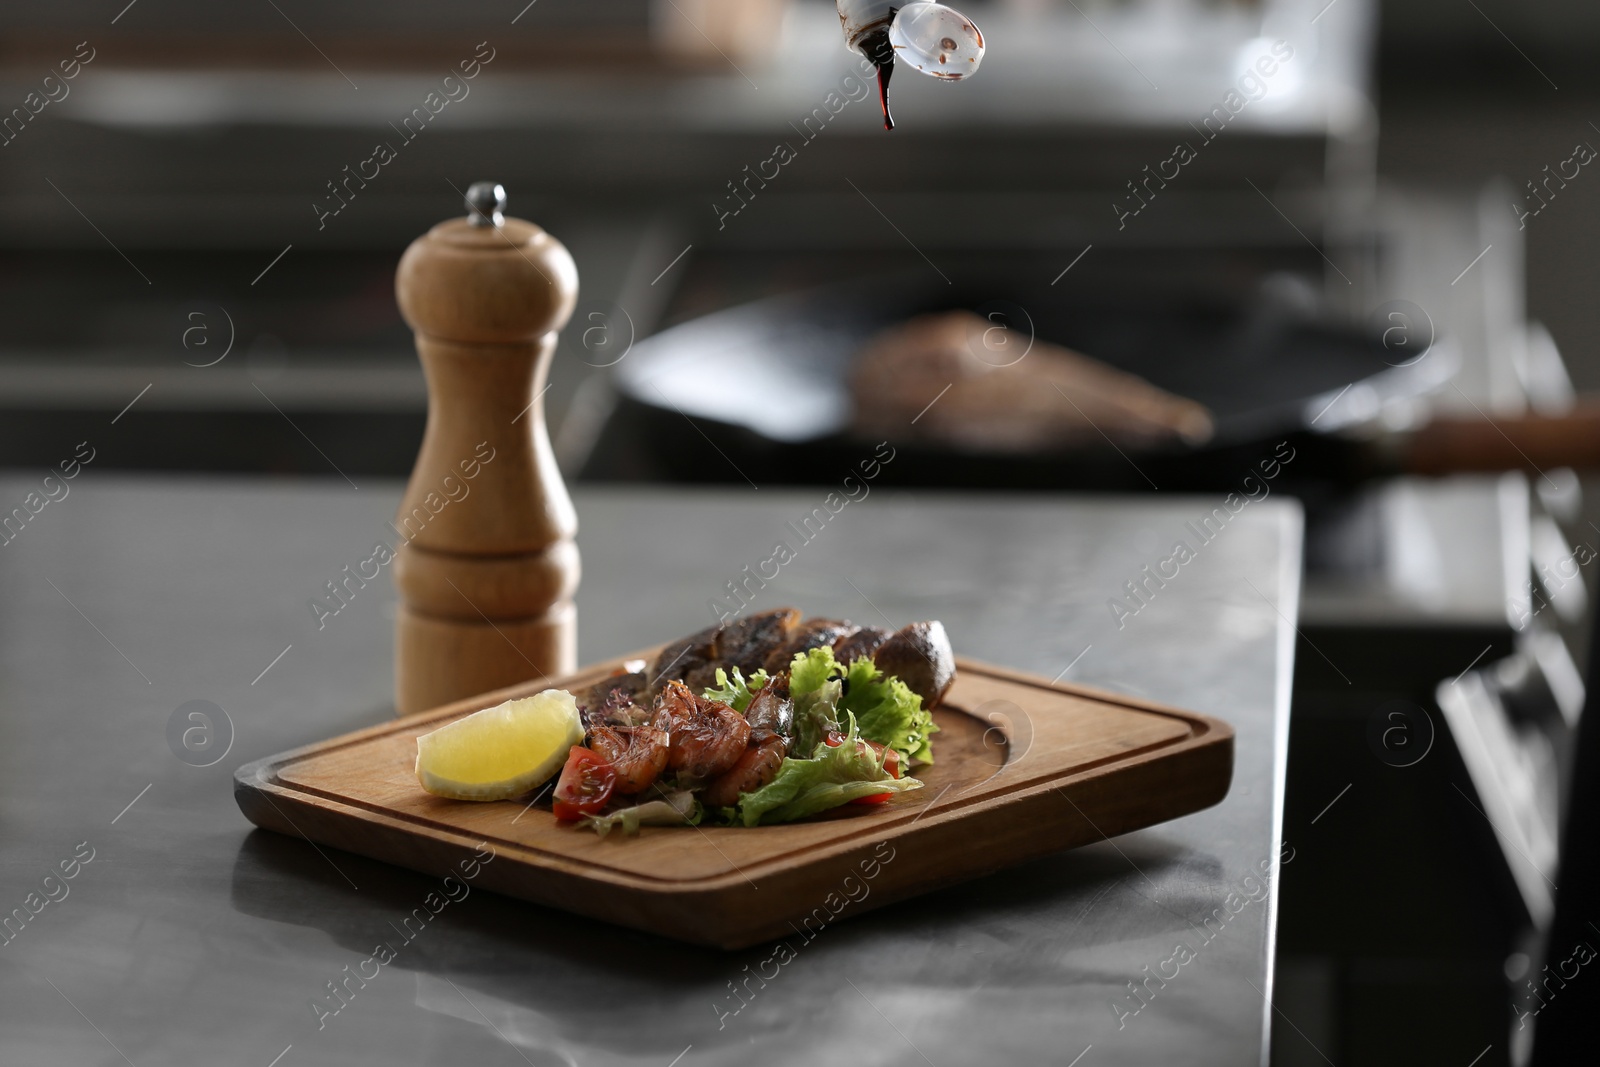 Photo of Adding sauce to tasty meal on table in restaurant kitchen. Cooking food